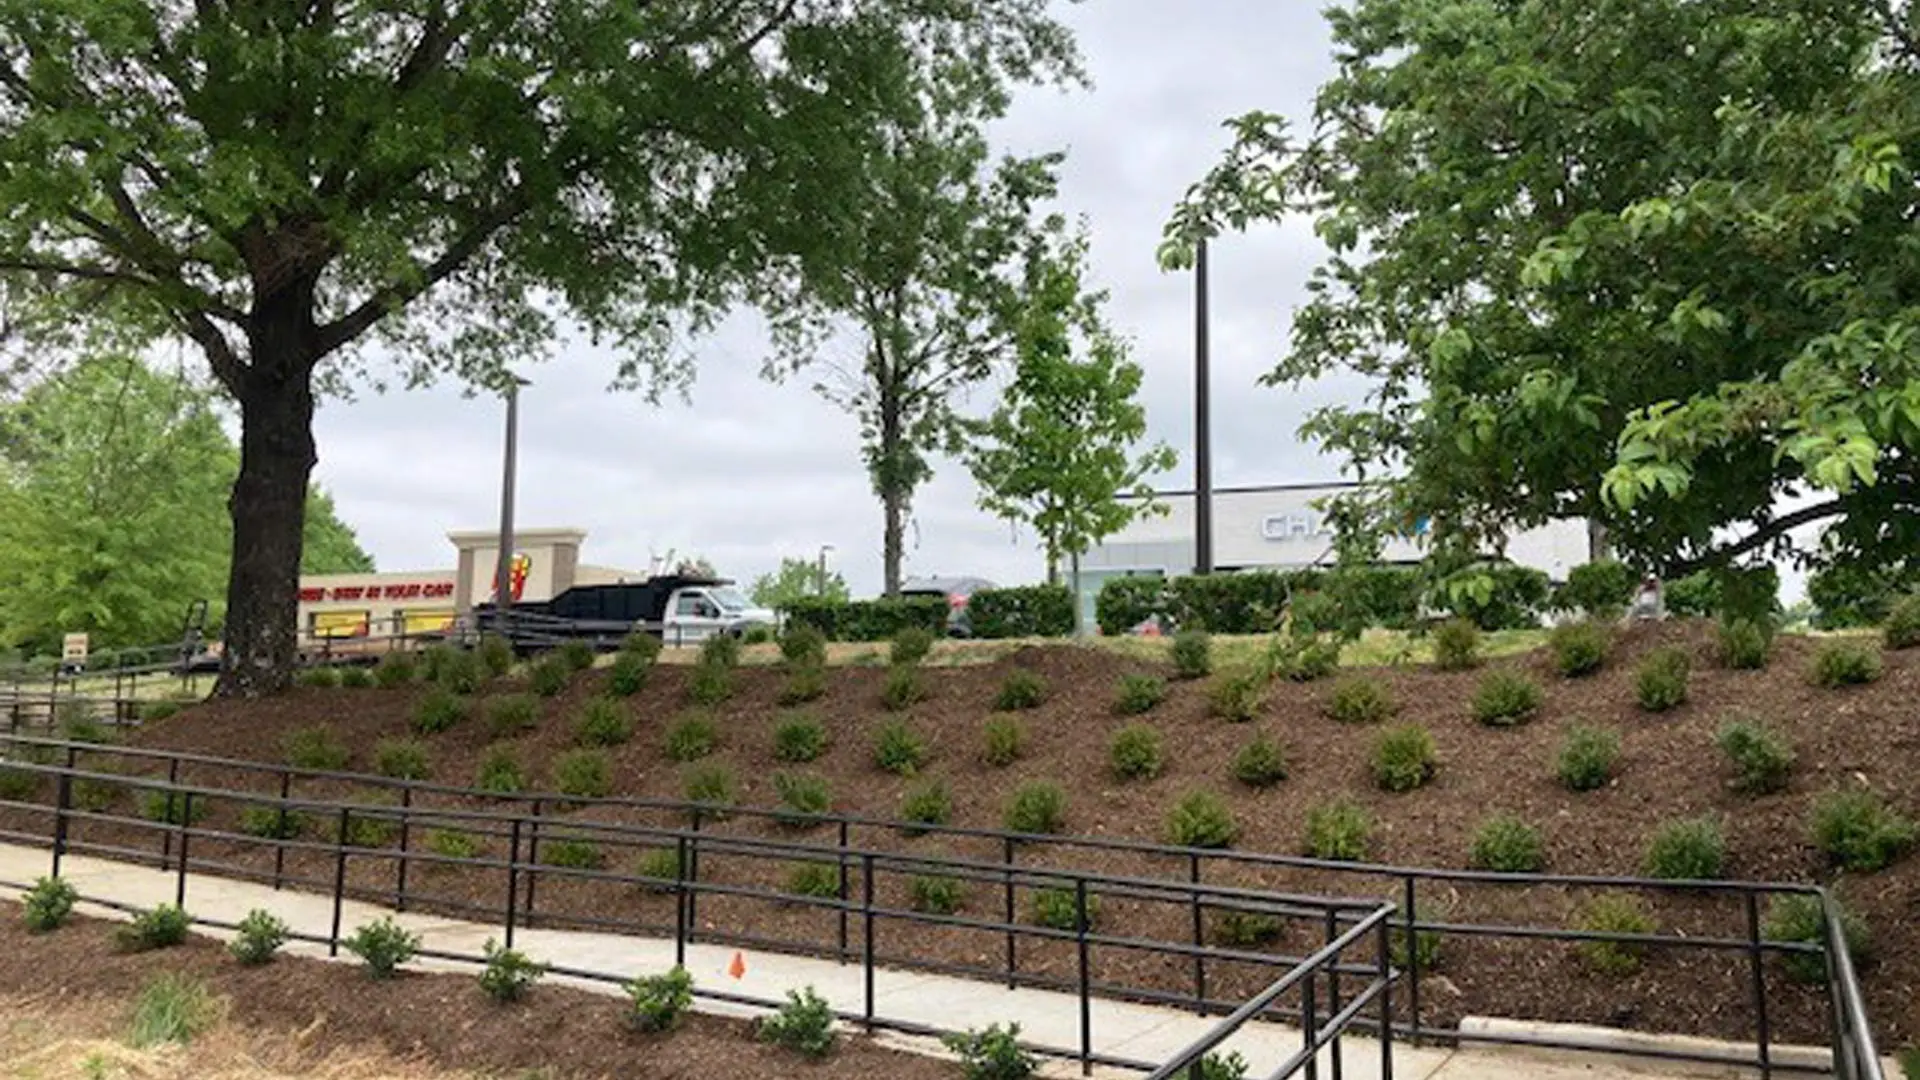 Landscape bed installed for commercial property in Charlotte, NC.